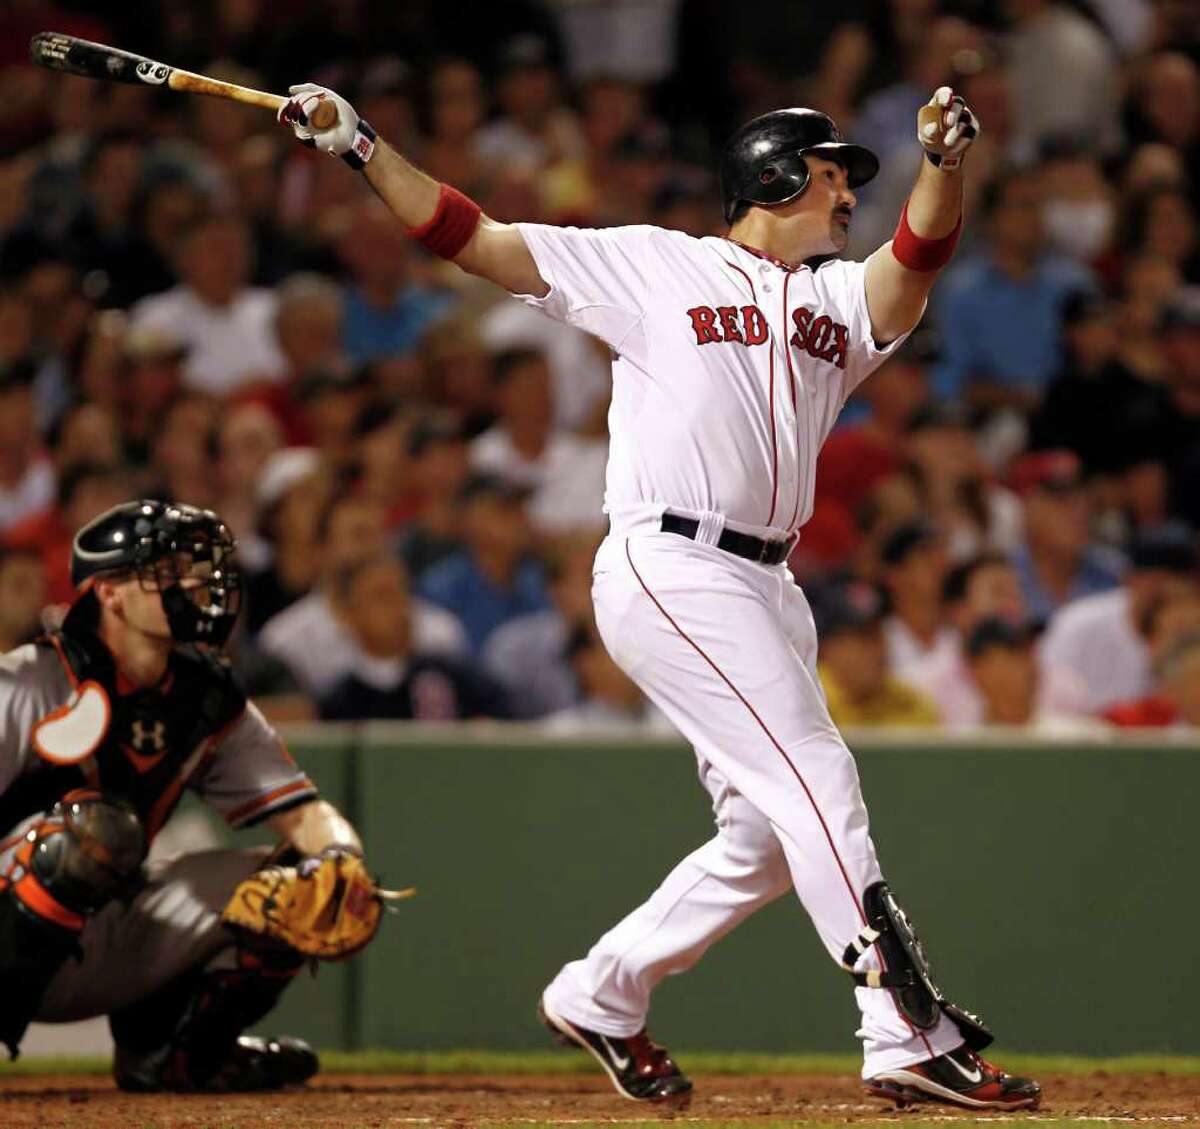 Boston Red Sox's Adrian Gonzalez watches his home run against the Baltimore Orioles during the fifth inning of a baseball game at Fenway Park in Boston on Thursday, July 7, 2011. Orioles catcher Matt Wieters is at left. (AP Photo/Winslow Townson)